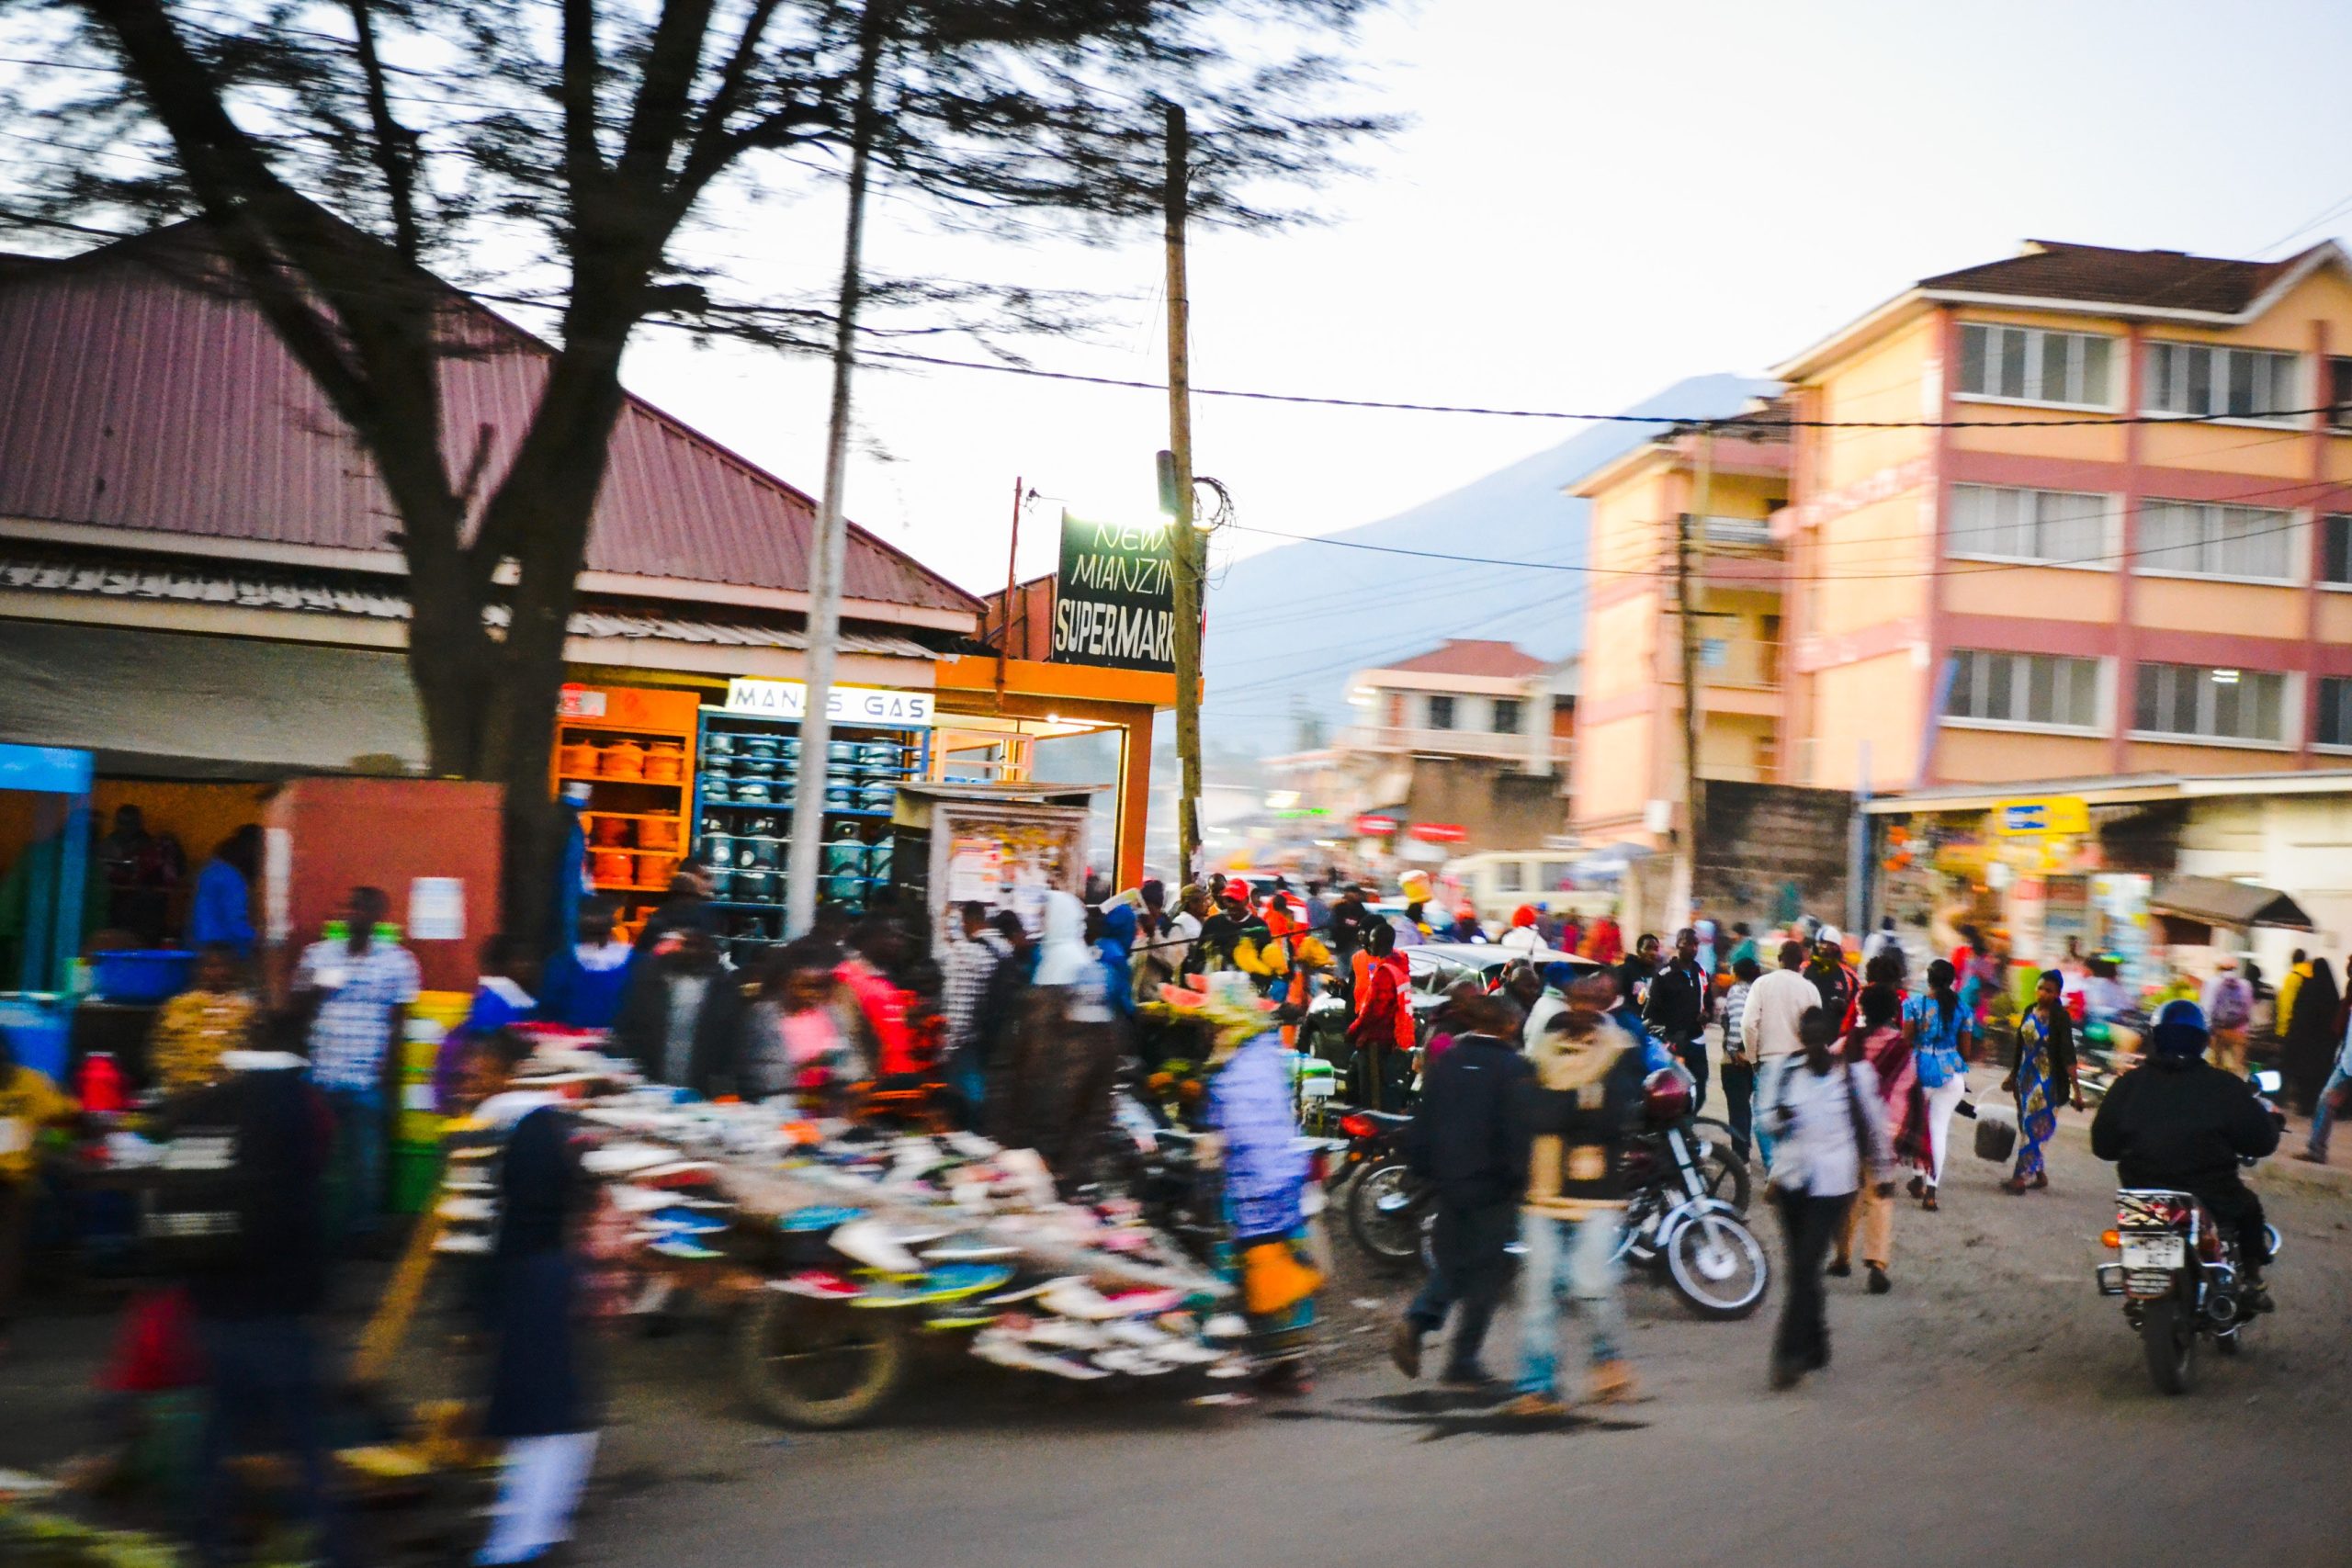 Mobile money penetration in Africa hindered by poor infrastructure, low household income